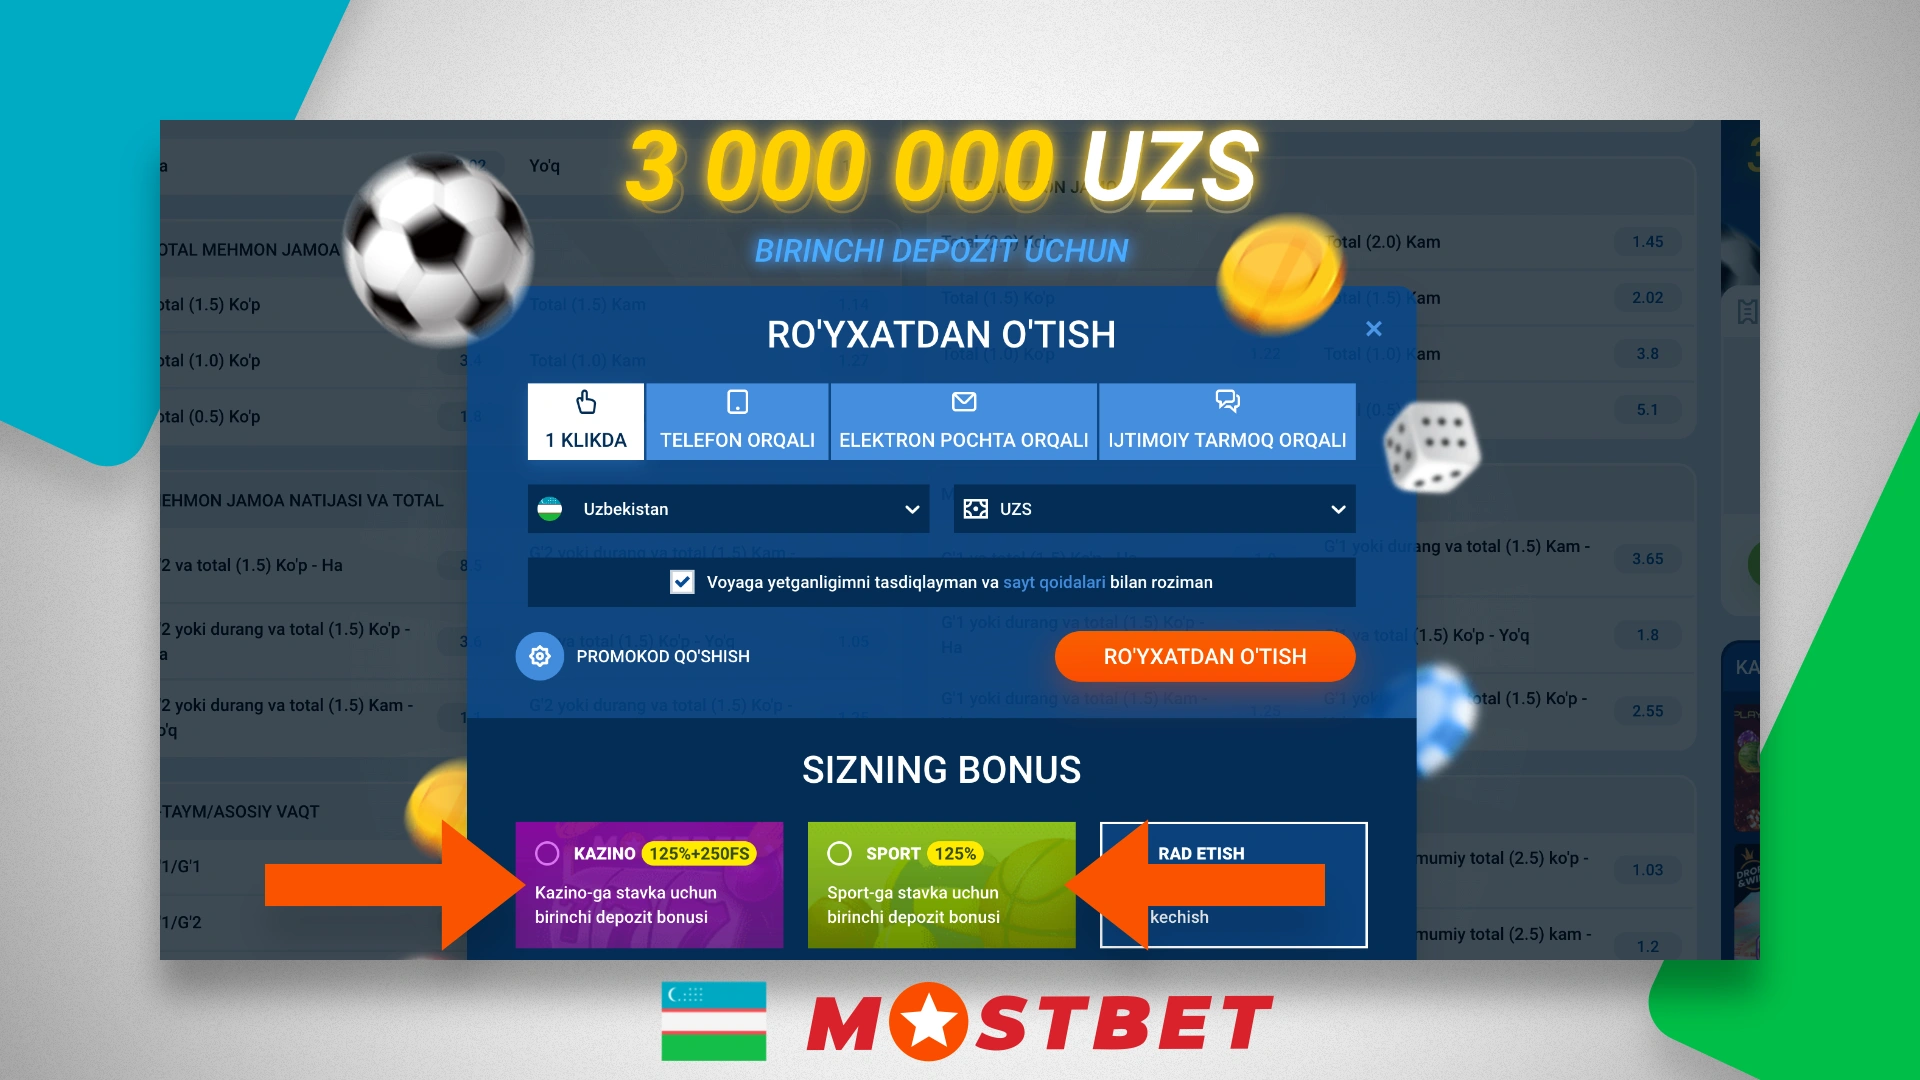 Mostbet welcome bonuses for new players from Uzbekistan